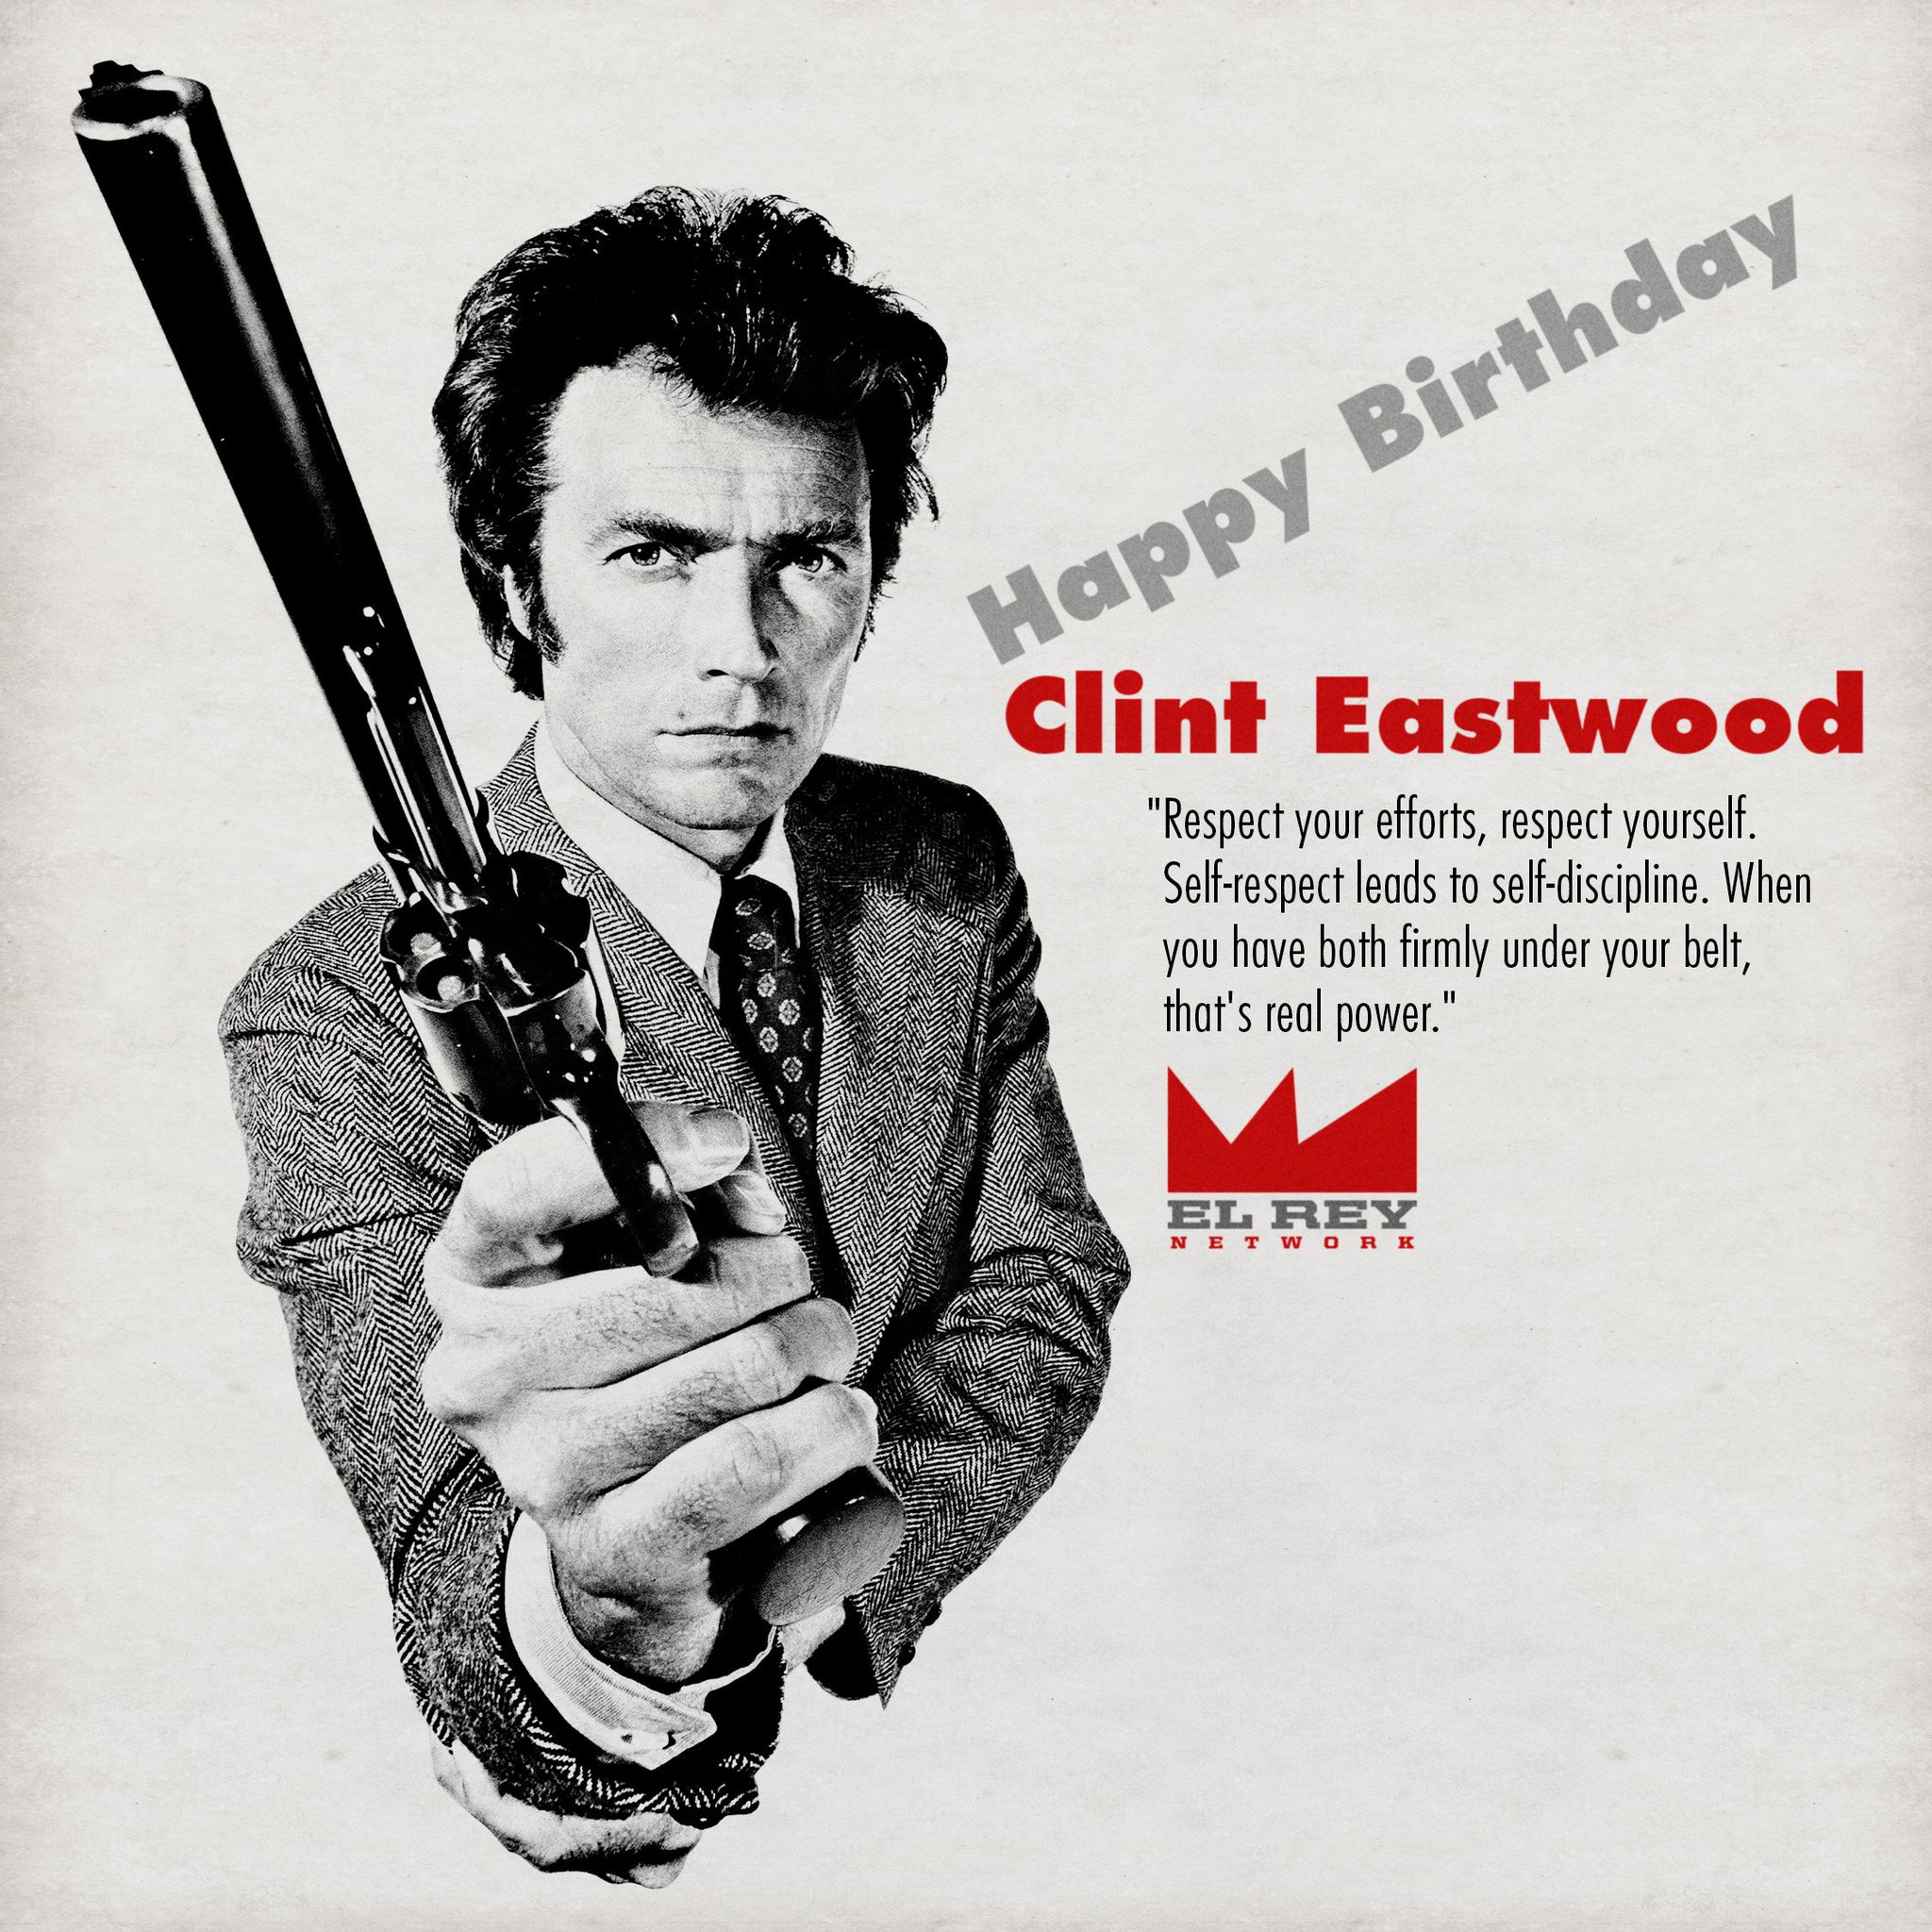 Happy Birthday to the Actor, Director & Icon - Clint Eastwood, from 